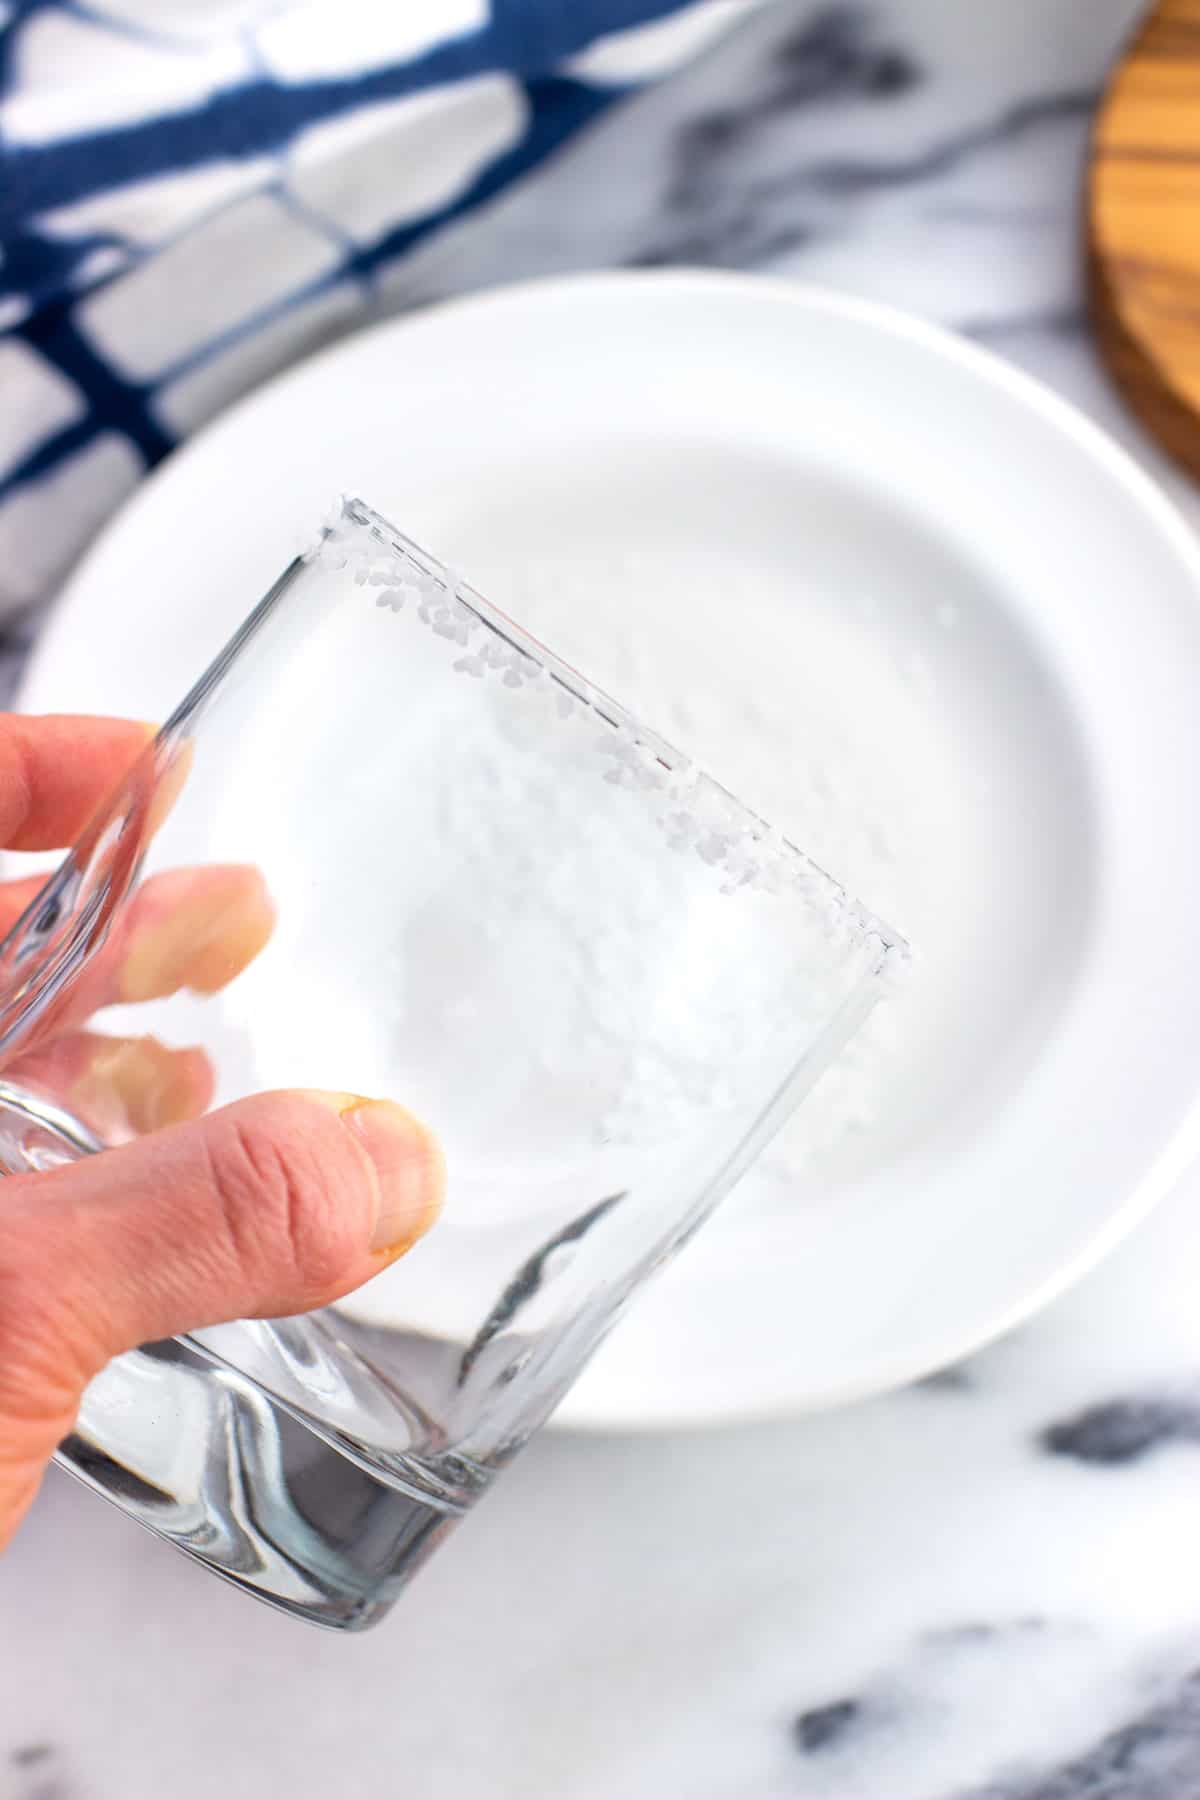 A hand rolling the rim of a short glass into a plate of coarse salt.